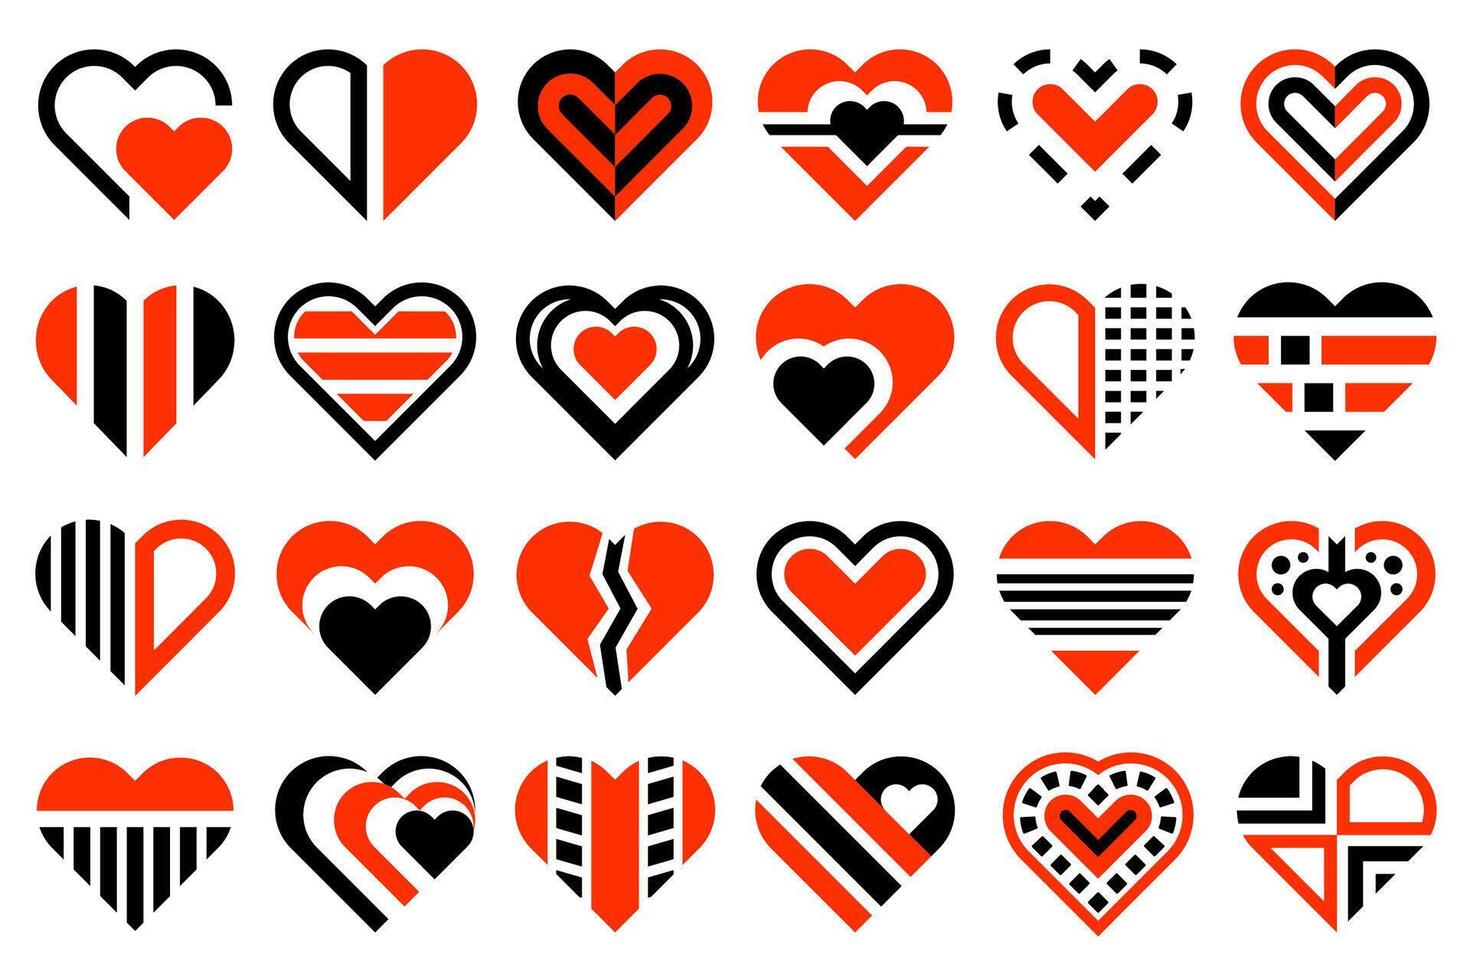 Abstract black and red heart design elements, collection of decorative stylized geometric heart shape designs. vector